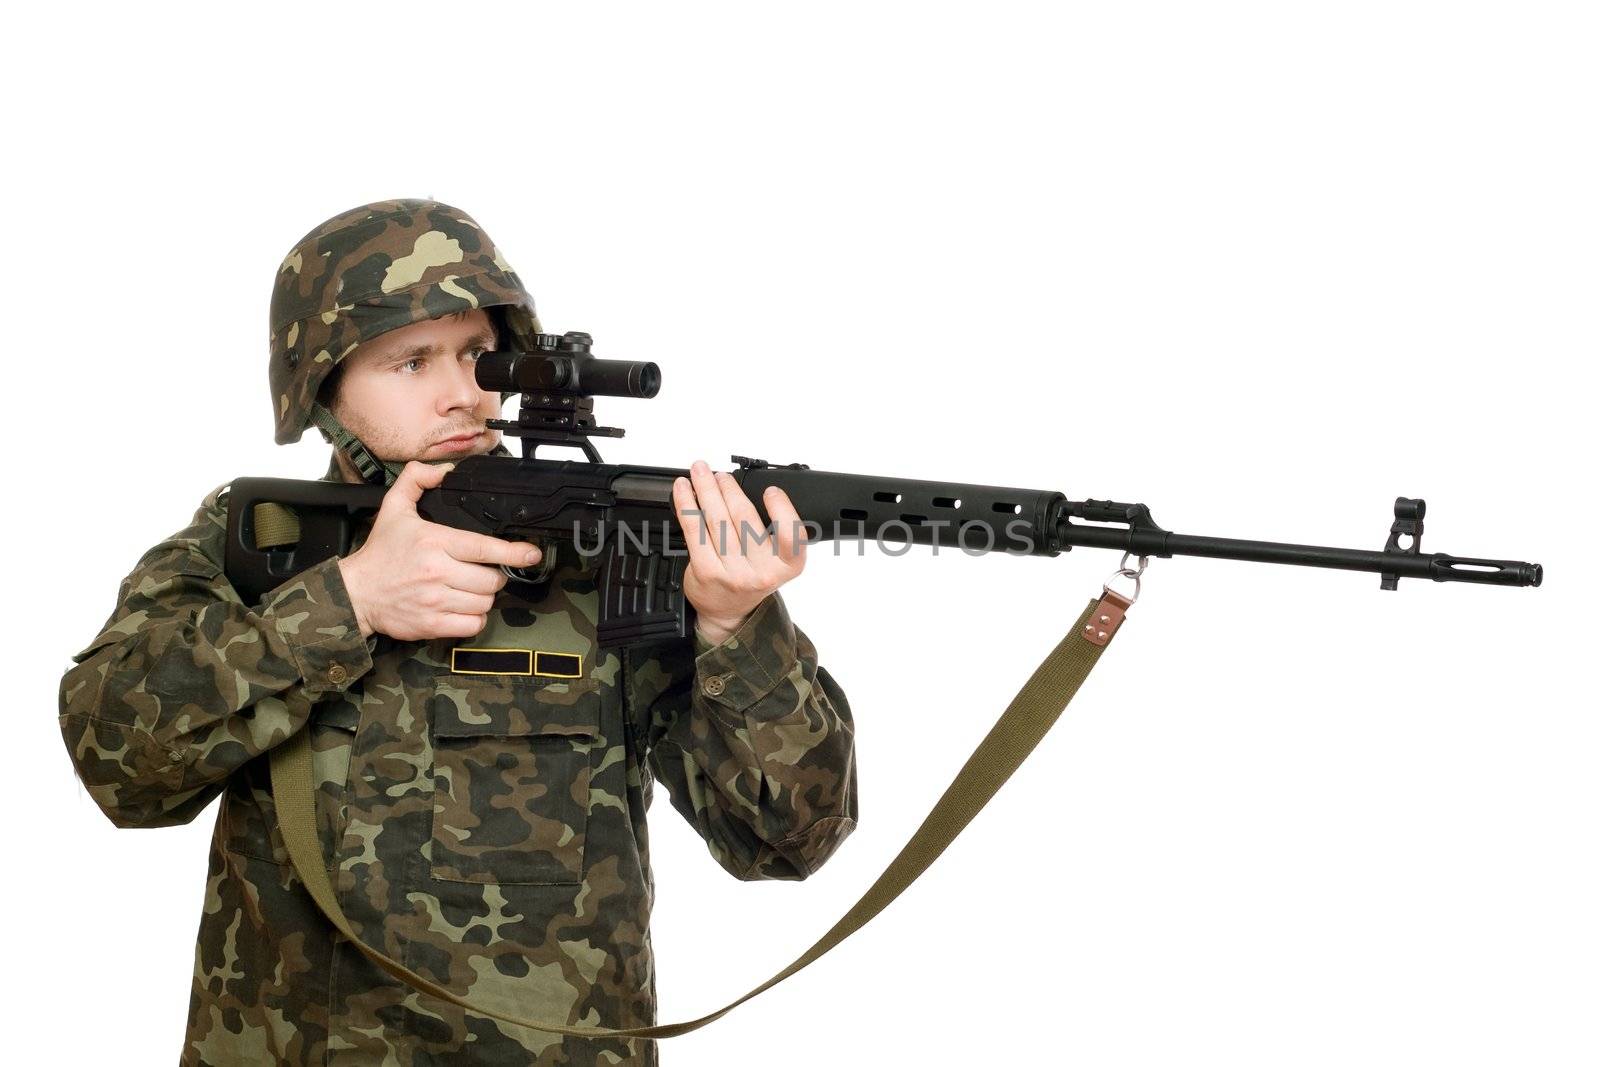 Soldier holding a rifle in studio. Isolated